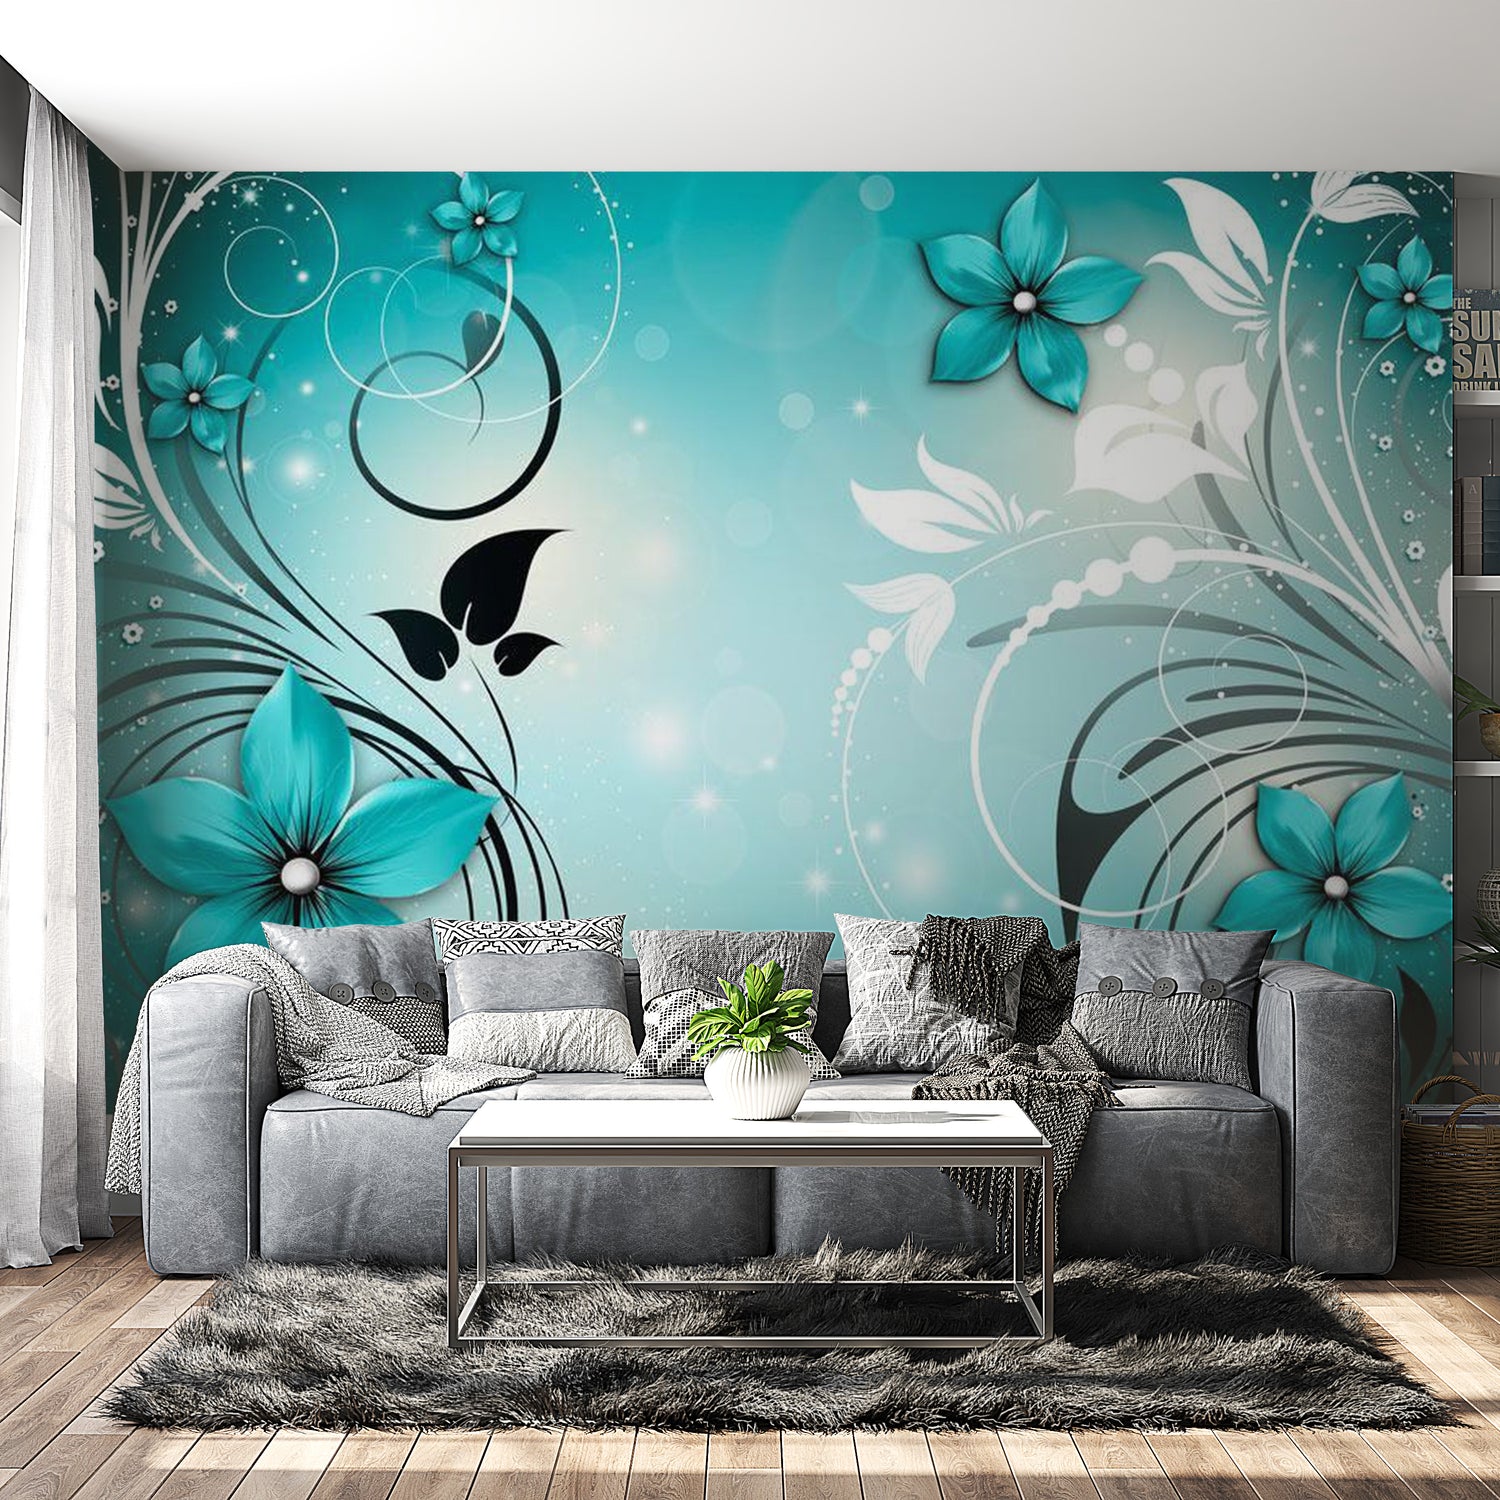 Peel & Stick Floral Wall Mural - Turquoise Dream - Removable Wall Decals